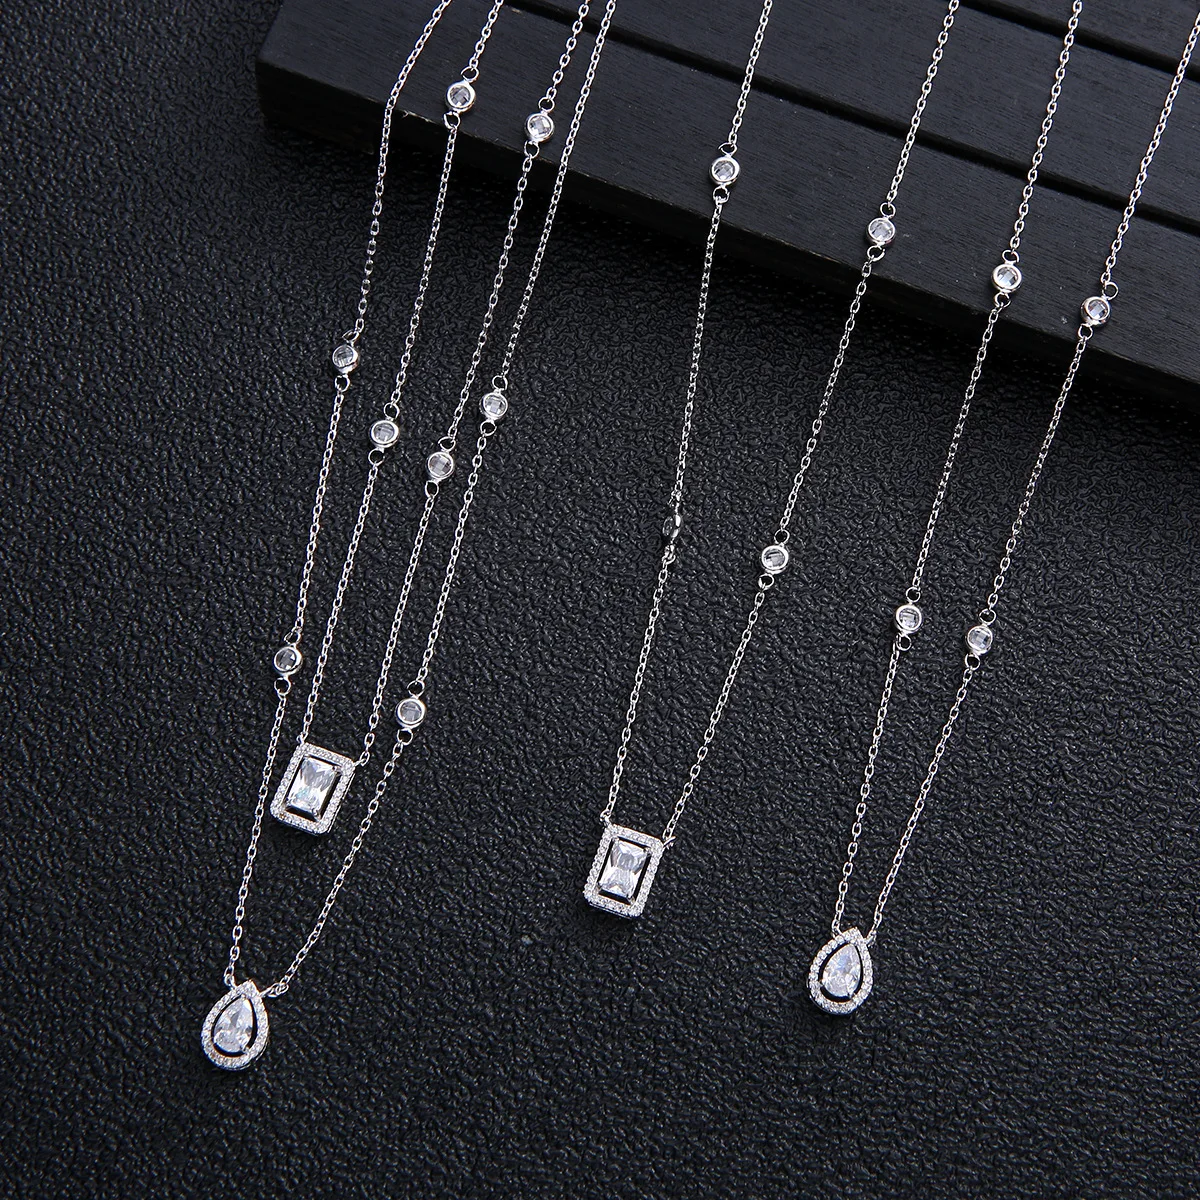 

Sexy Glamour Ladies Necklace Fashion Double Layer Cute Geometric Pendant Shiny Ladies Necklace Banquet Luxury Jewelry Gifts